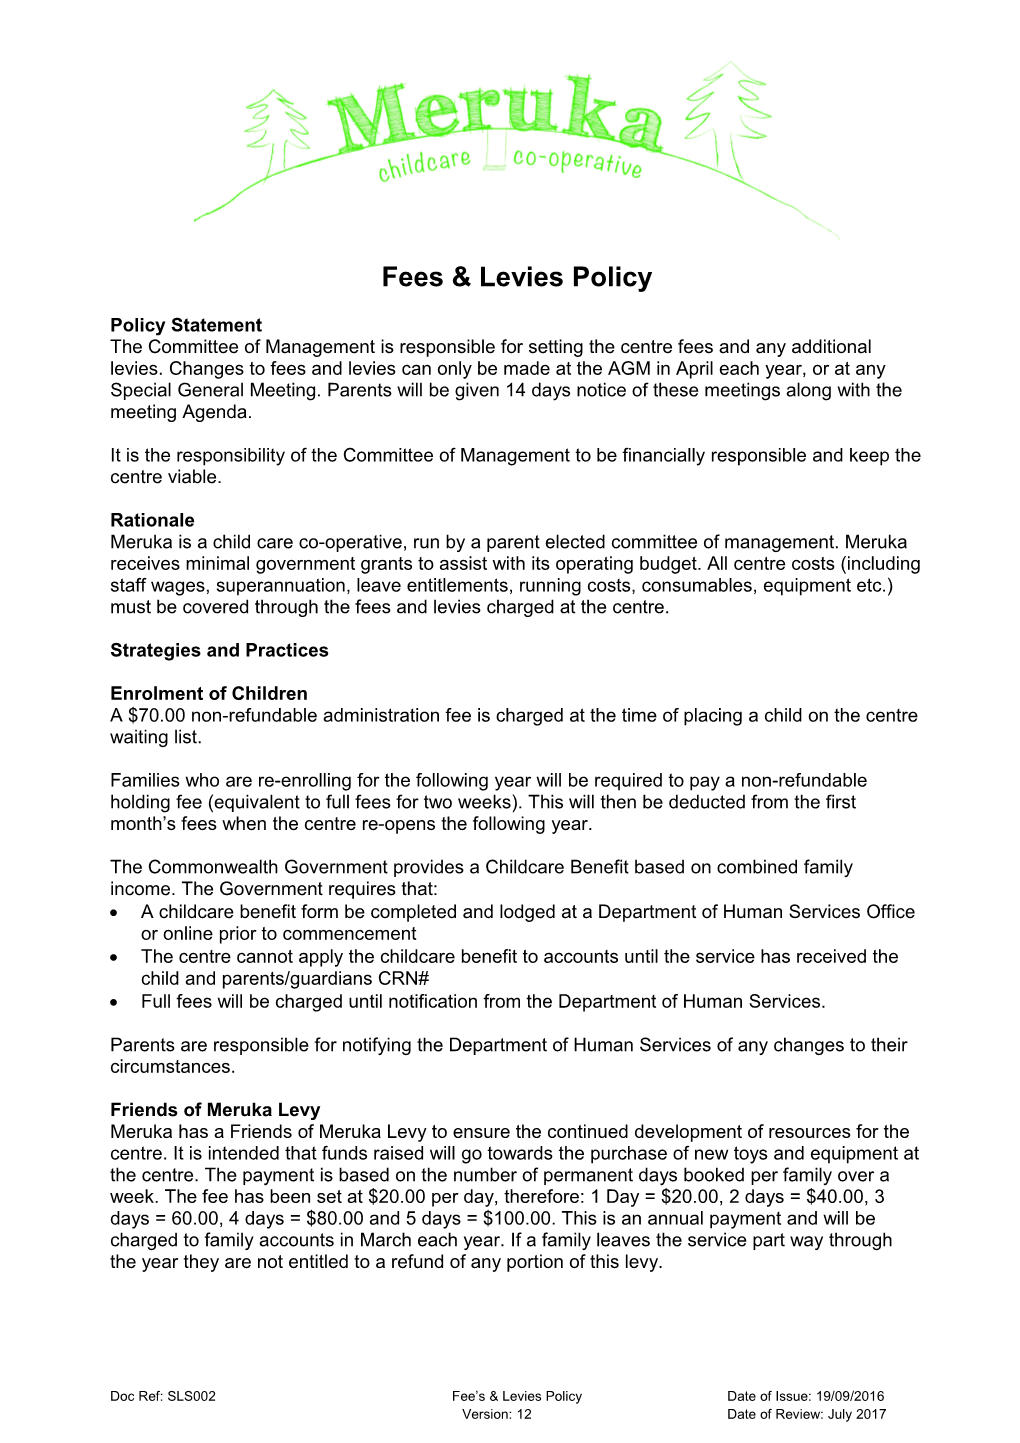 Fees & Levies Policy